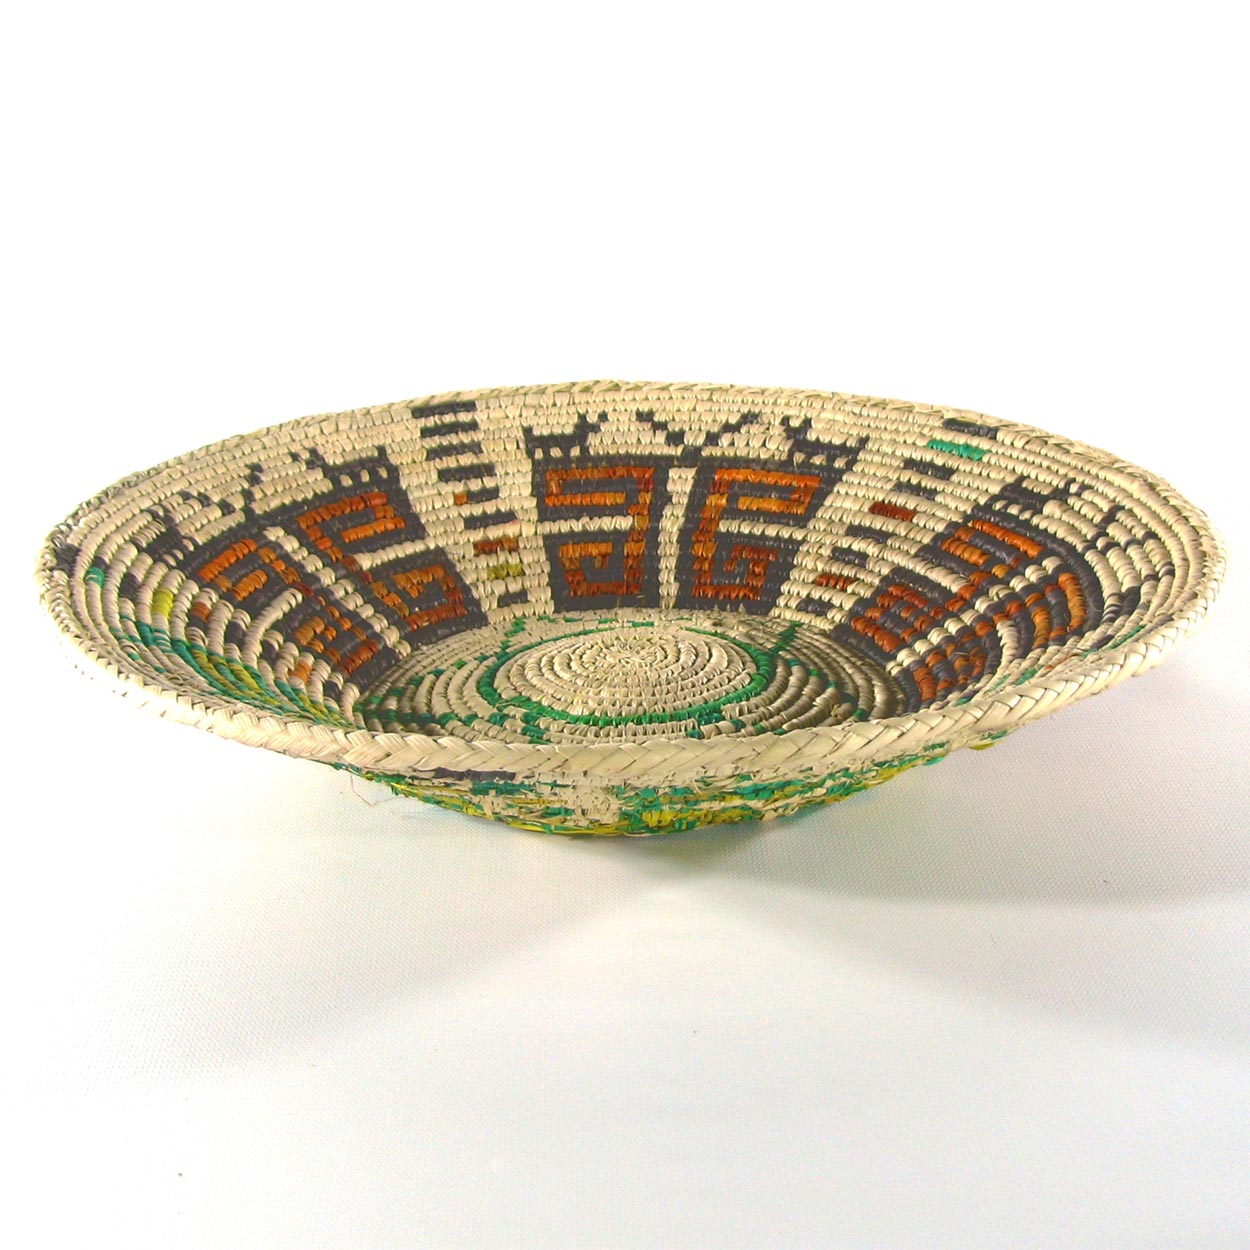 140253-344 - 13.5in x 2in One-of-a-Kind Shallow Bowl Fine Art Basket - No. 344